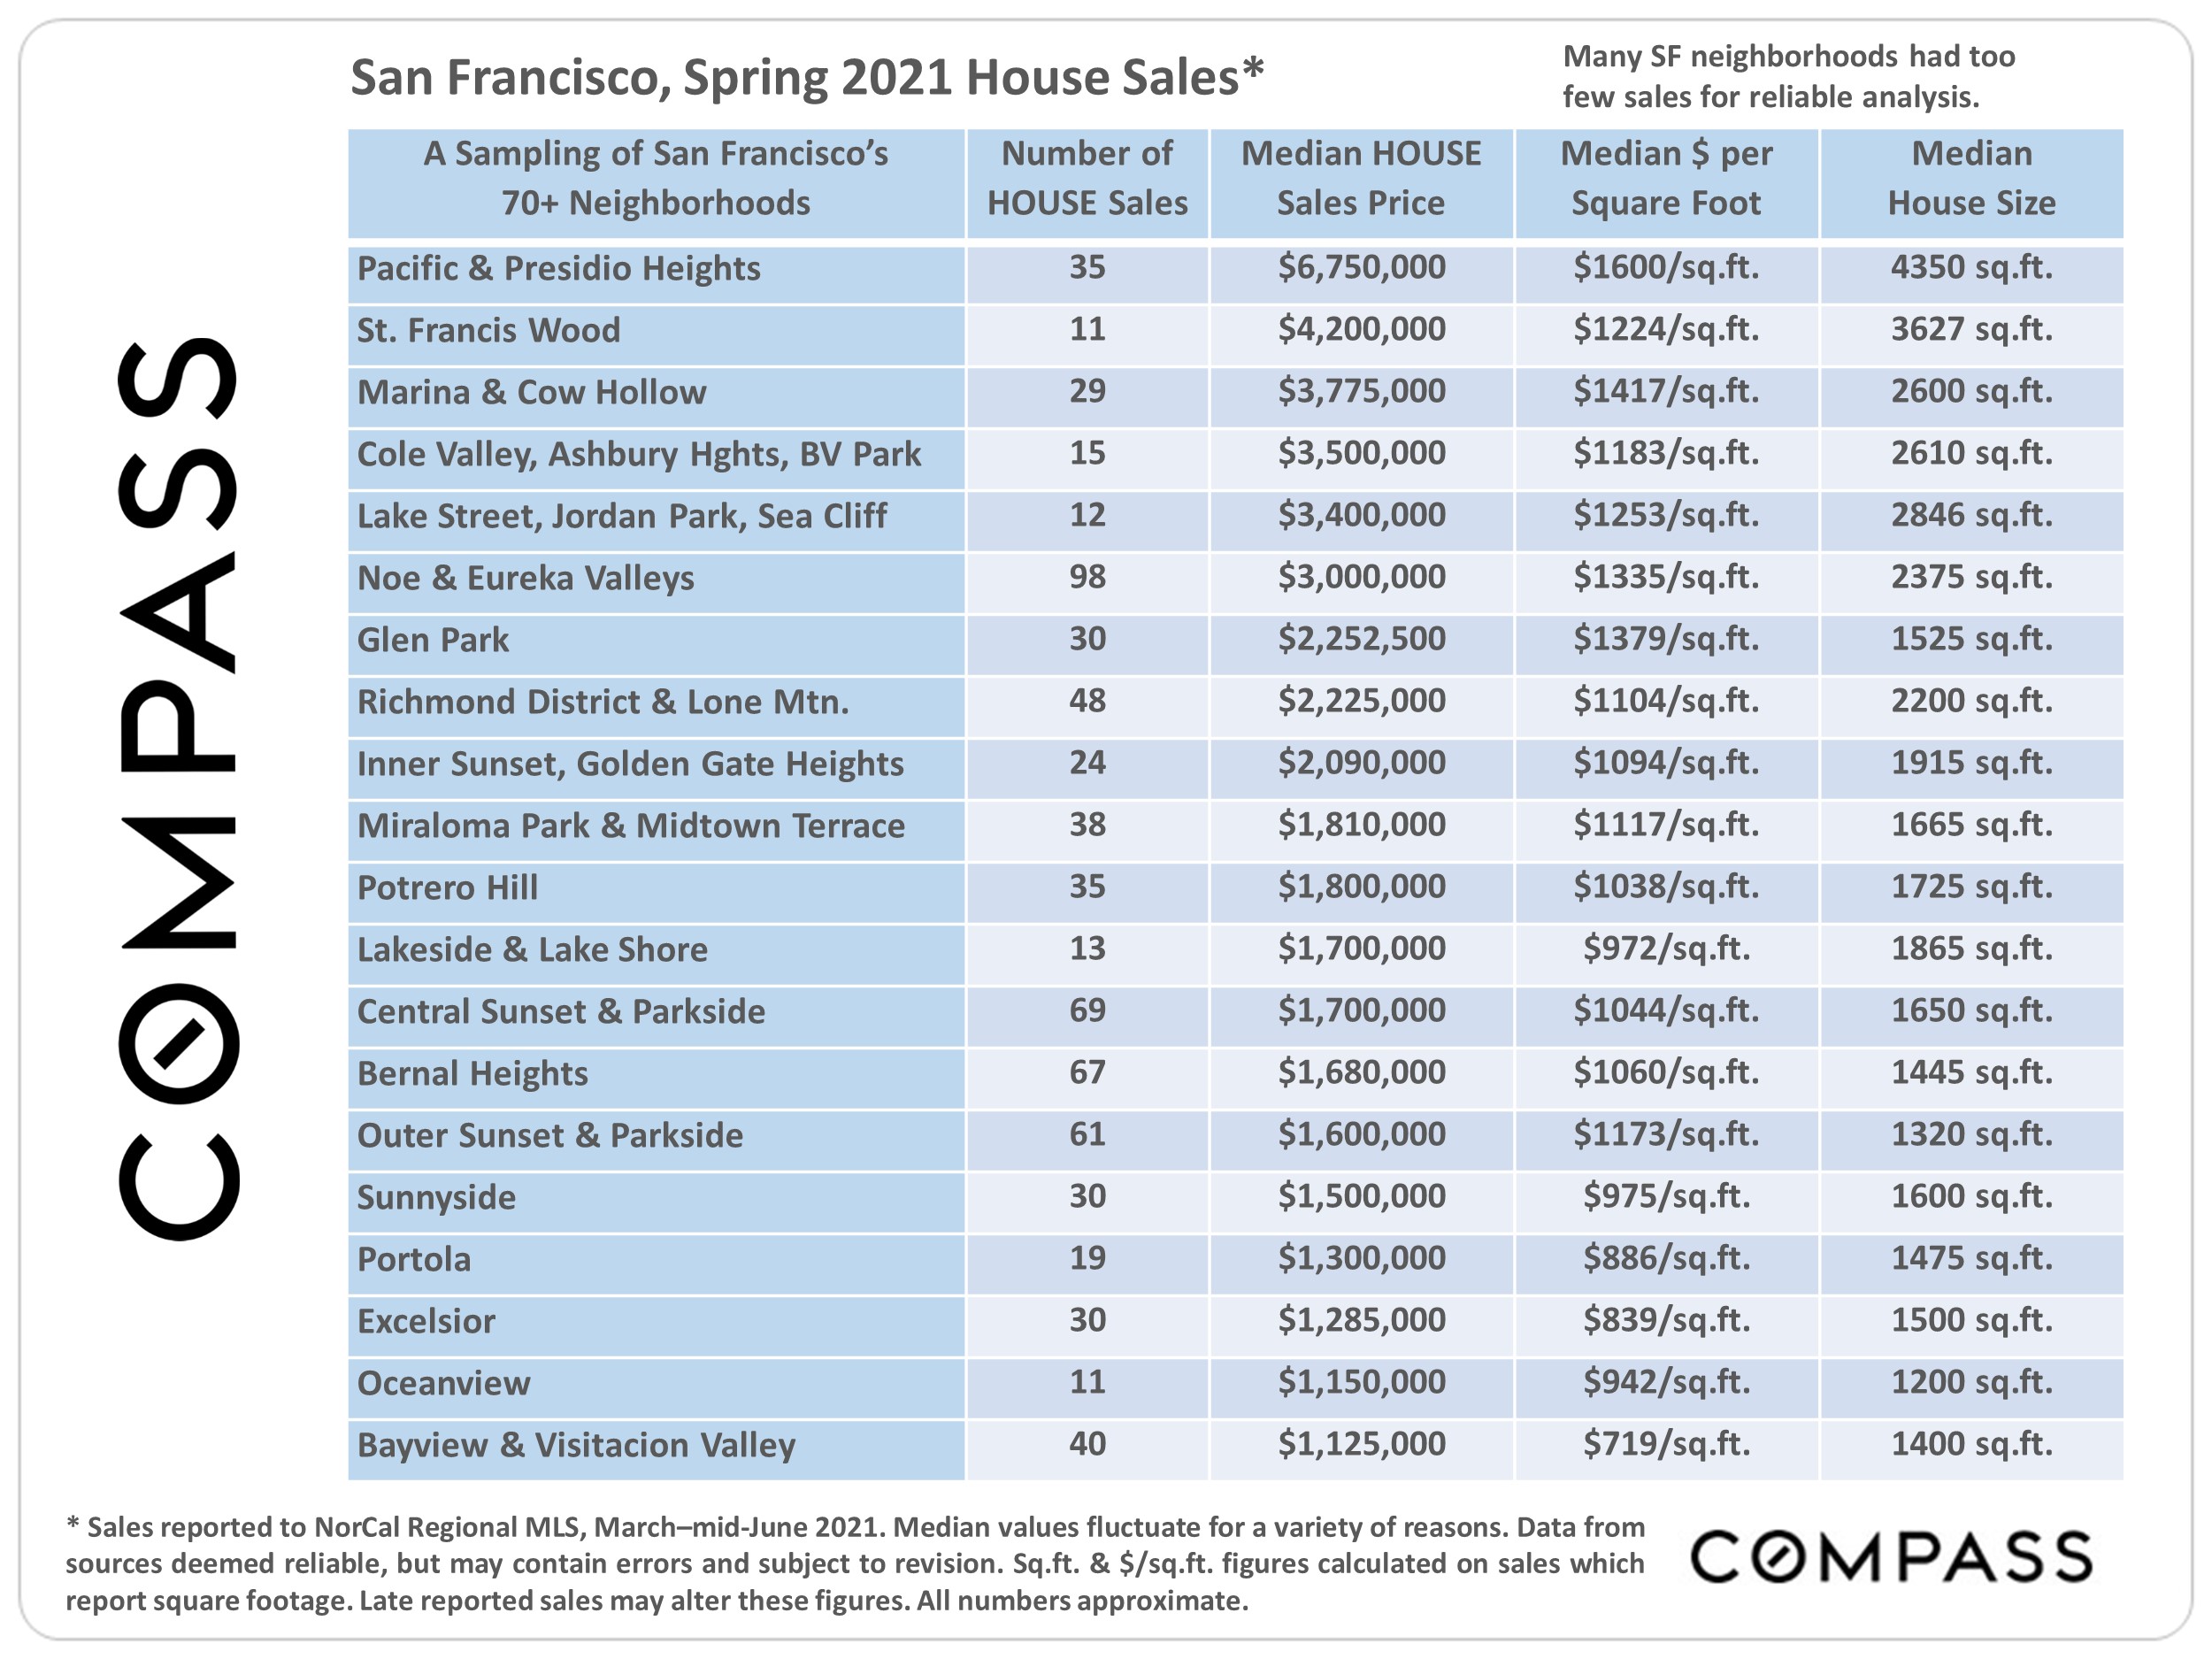 Chart of San Francisco House sales, Spring 2021